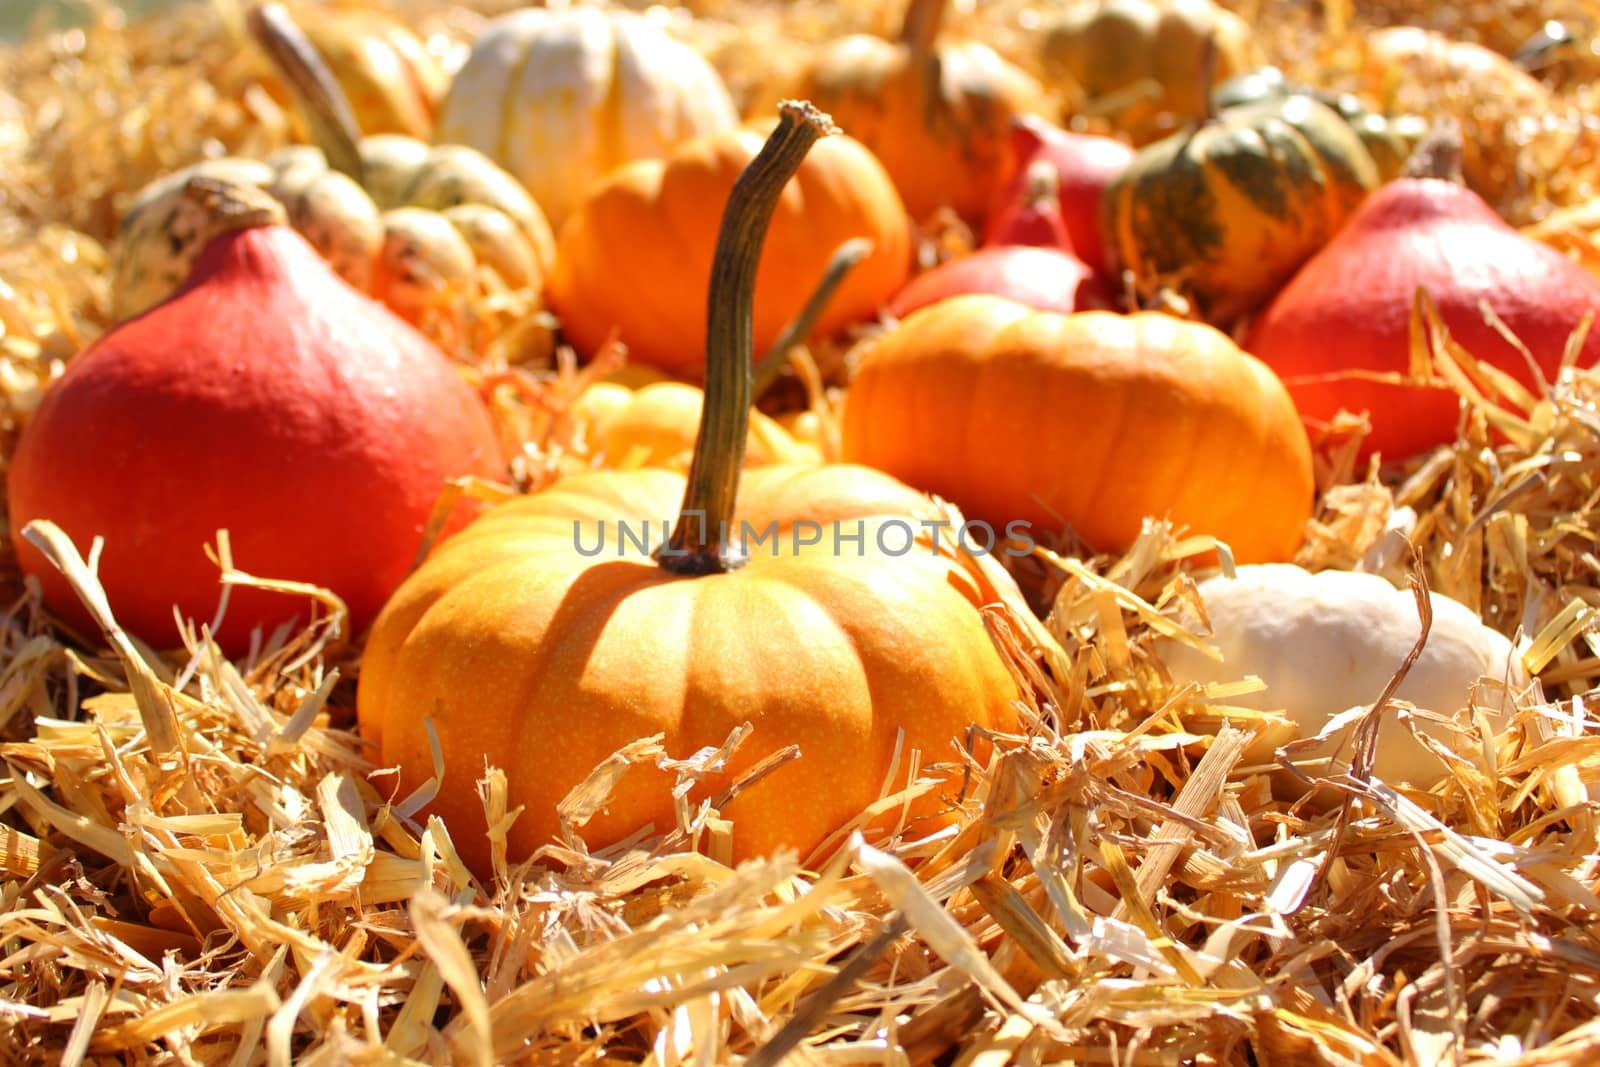 The picture shows different pumpkins on straw